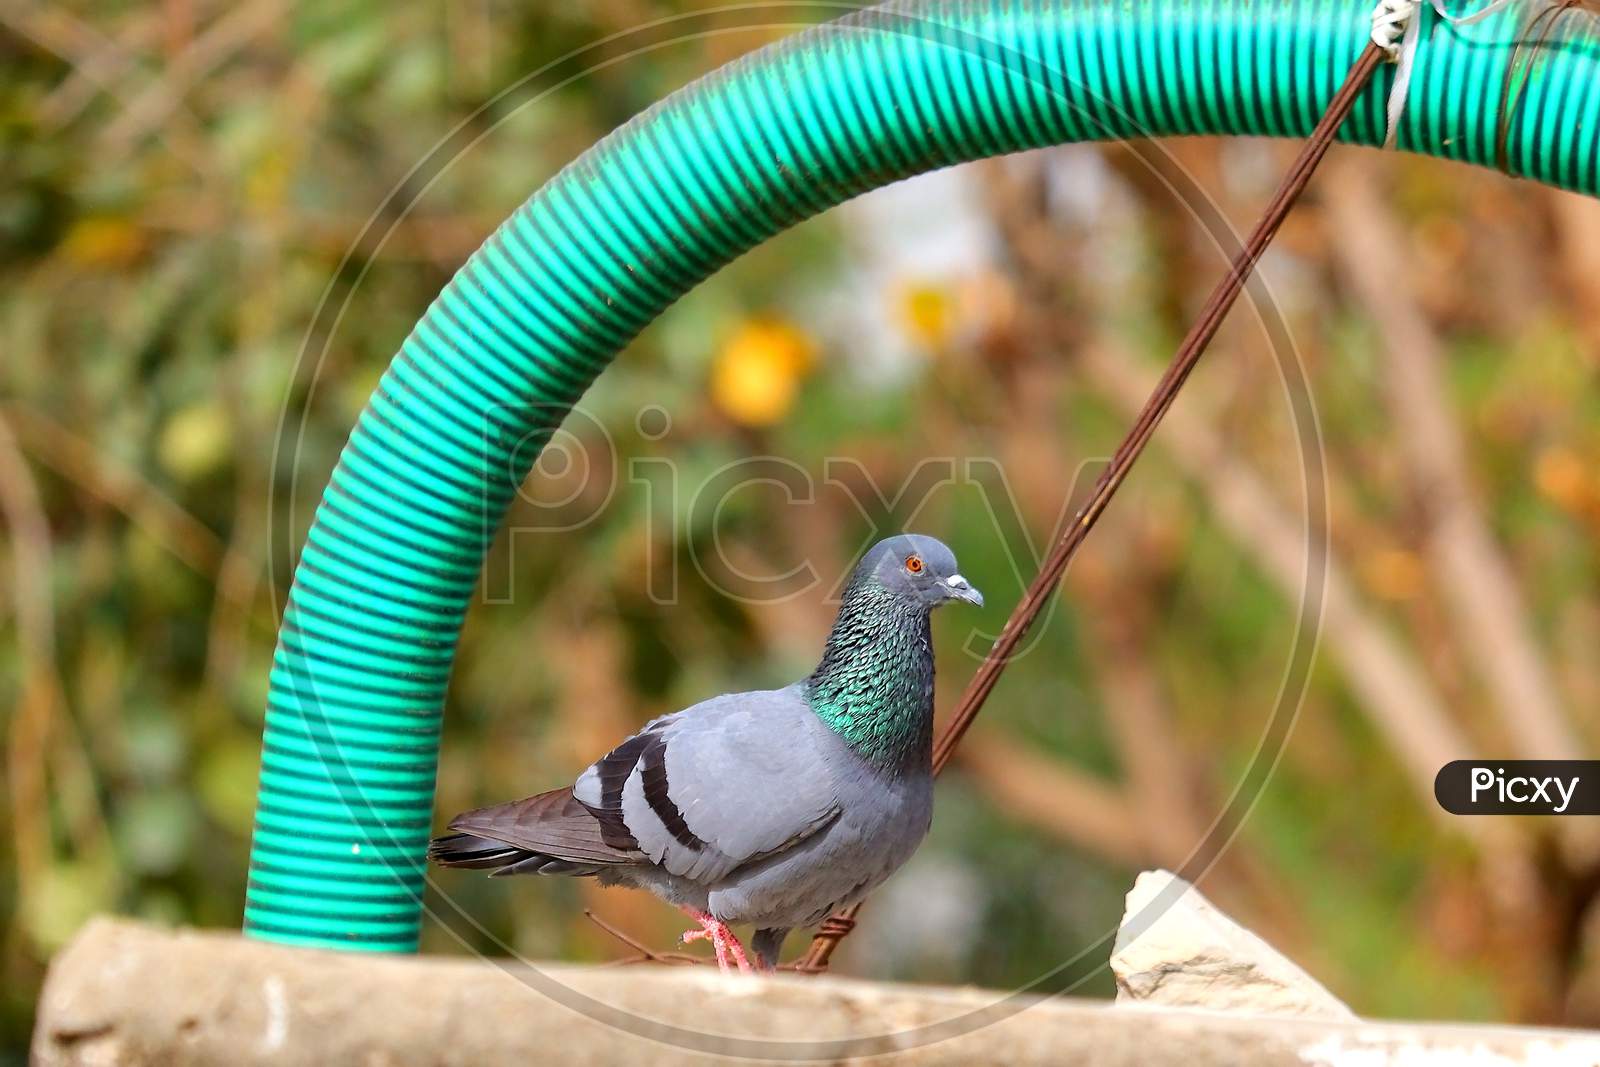 domestic pigeon walking on the surface